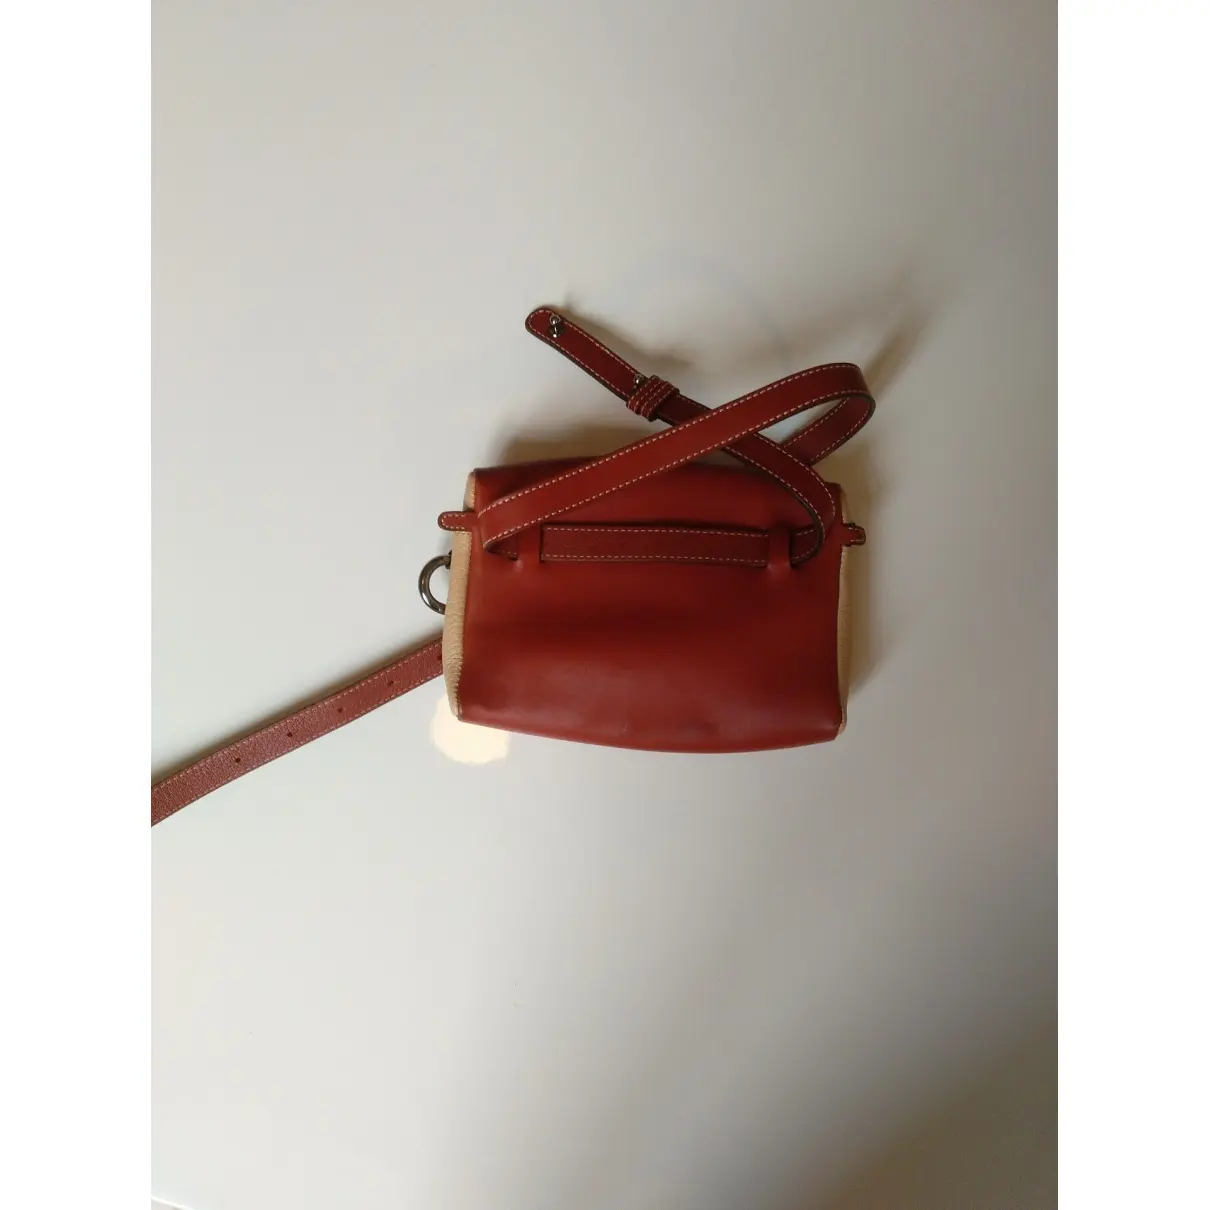 Buy Delvaux Leather clutch bag online